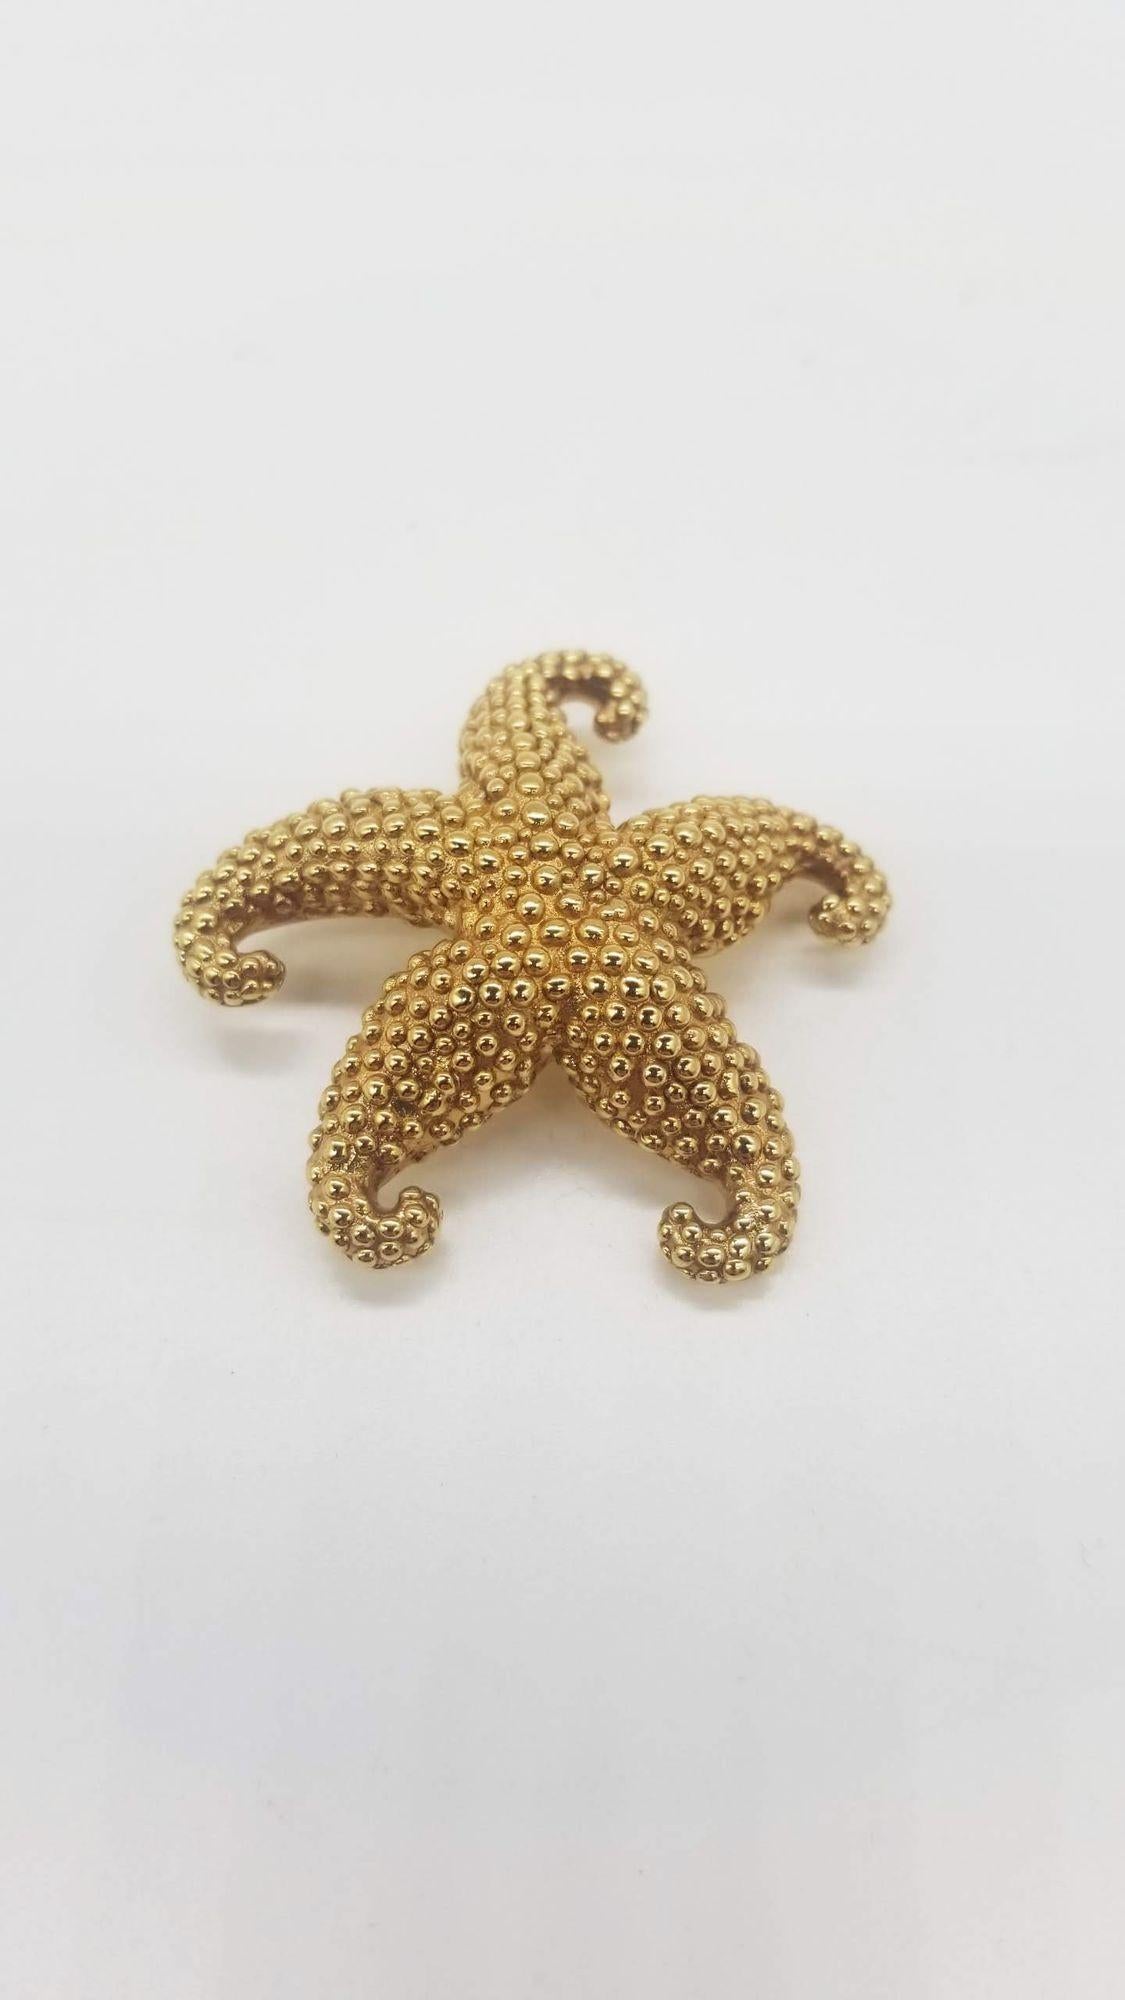 Late 20th Century 18K Gold Starfish Pin Brooch by Aya Azrielant For Sale